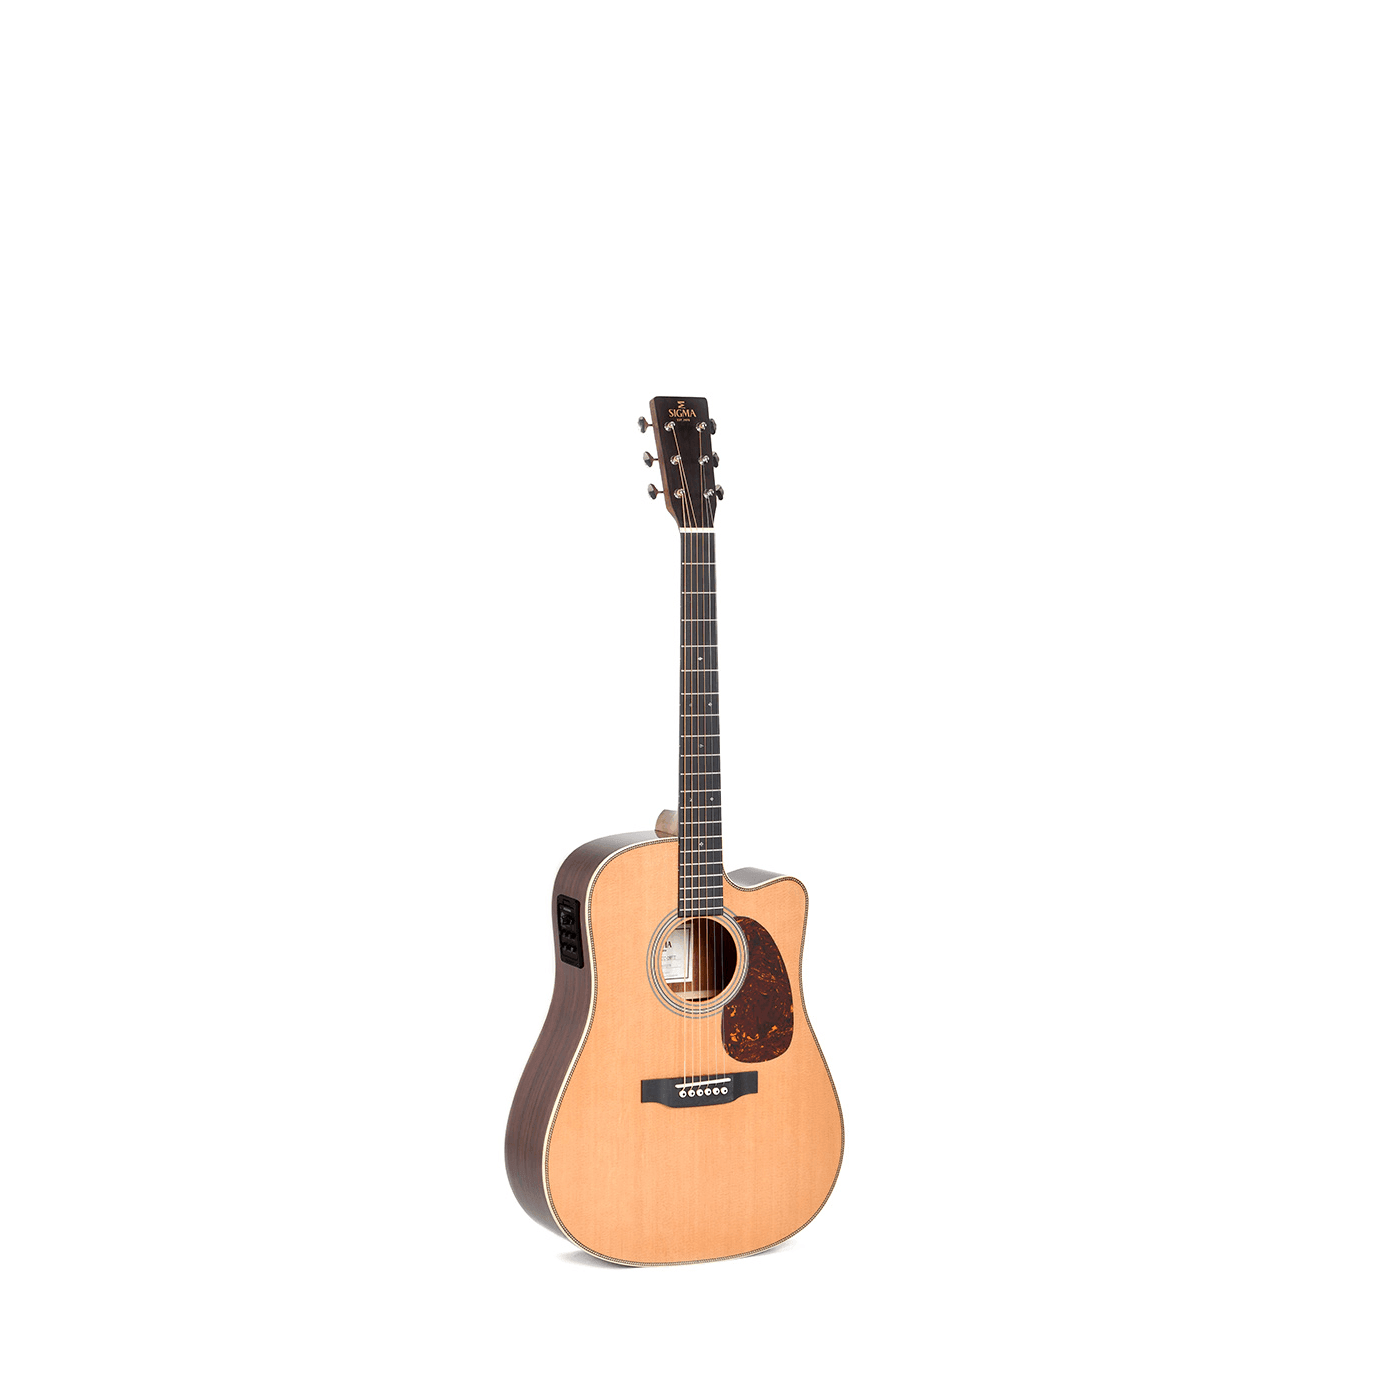 DTC-28HE Dreadnought Cutaway Solid Top & Pickup - Guitars - Acoustic by Sigma at Muso's Stuff